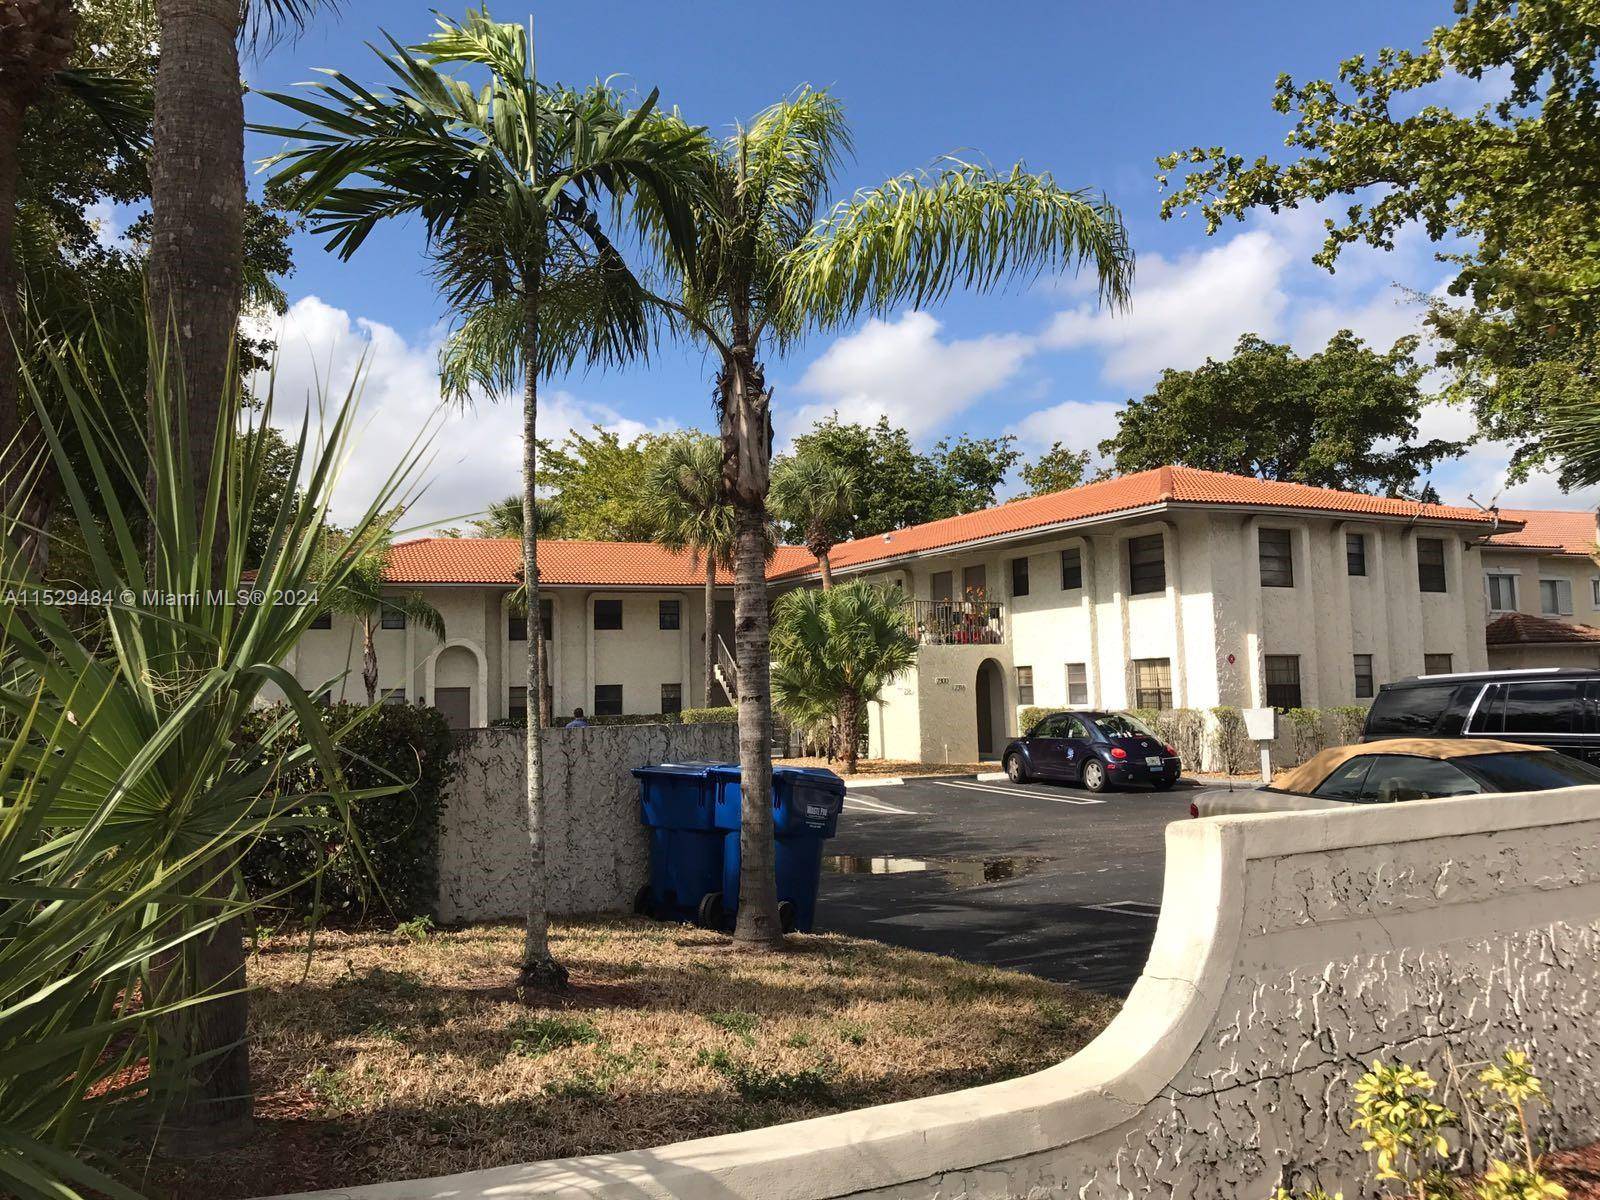 INVESTMENT OPPORTUNITY 9 CONDO UNIT SEE RENT ROLL ATTACHMENT COMPLETELY REMODELED, FULLY RENTED, CONDO RENTAL INCOME ALL UNITS ARE 2 BEDROOM 2 BATHROOM, WASHER DRYER INSIDE THE UNIT.